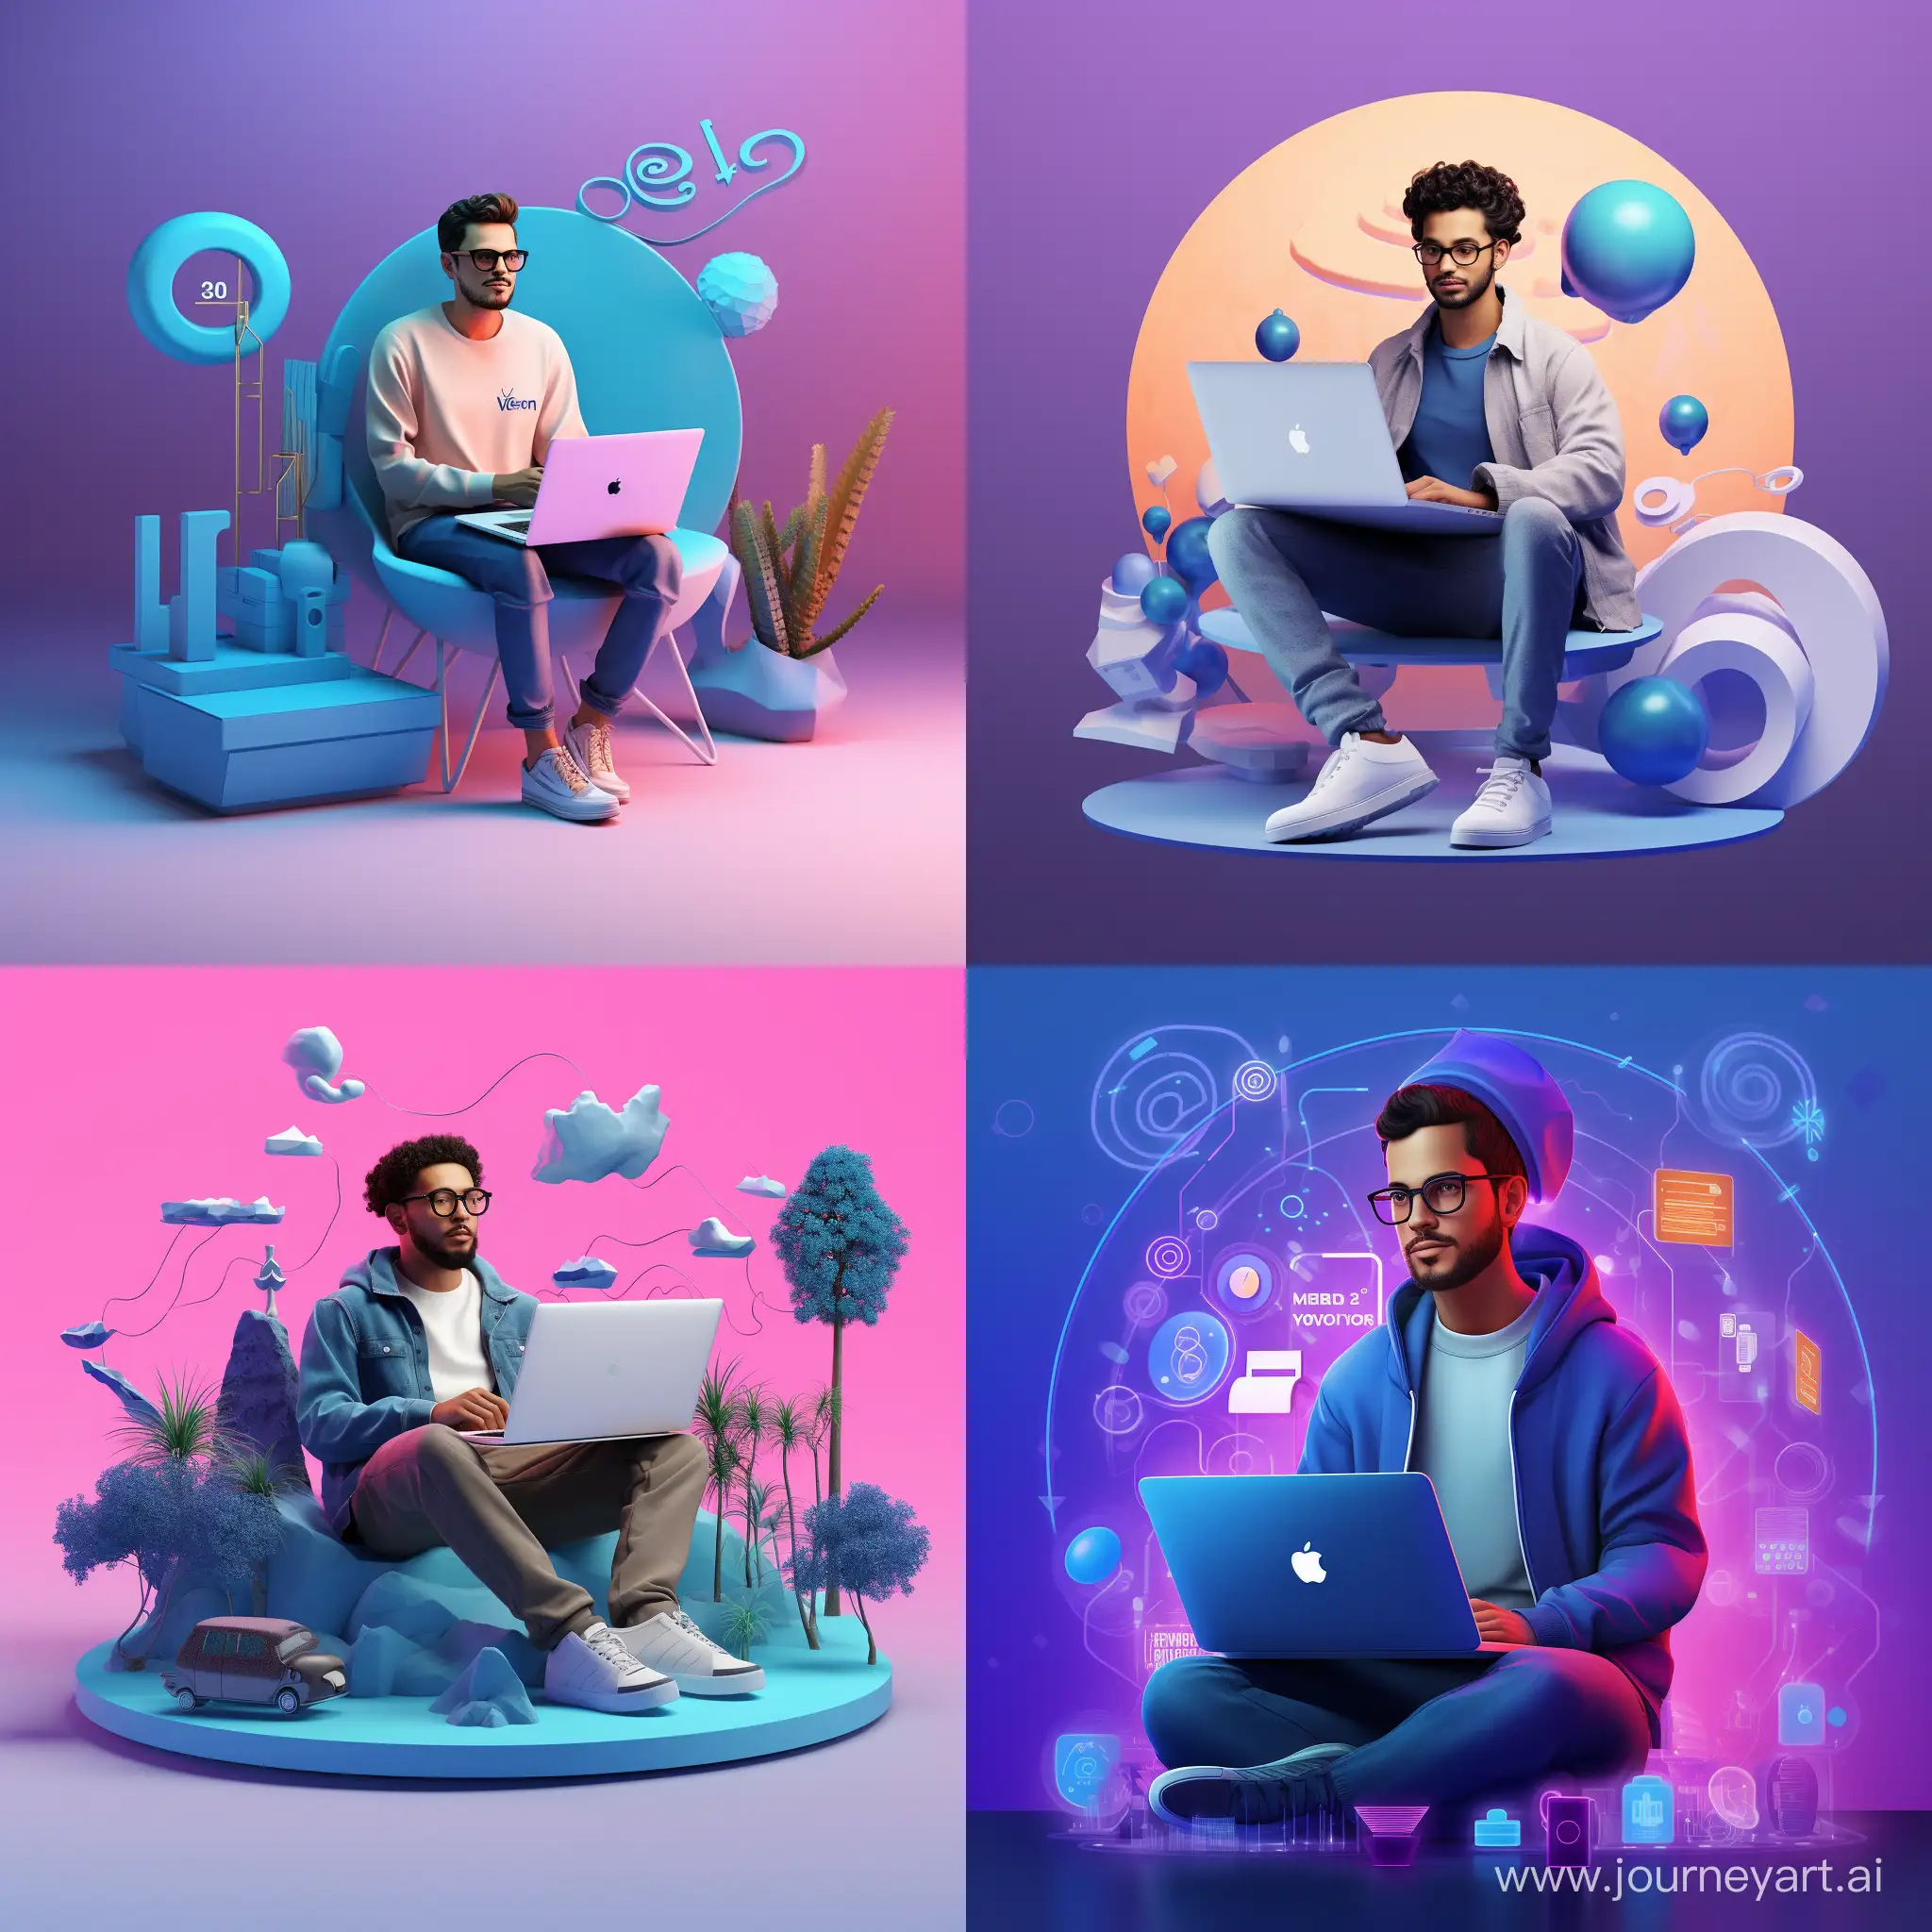 
‏Create a 3D illustration featuring a realistic man,
‏casually sitting with a blue dell laptop beside of a
‏social media logo, specifically 'Facebook.' The
‏character should looks like a Graphic designer and
‏Enterprenure, background of the image should
‏showcase a social media profile page real data
‏username `Adel Sadah' and a matching
